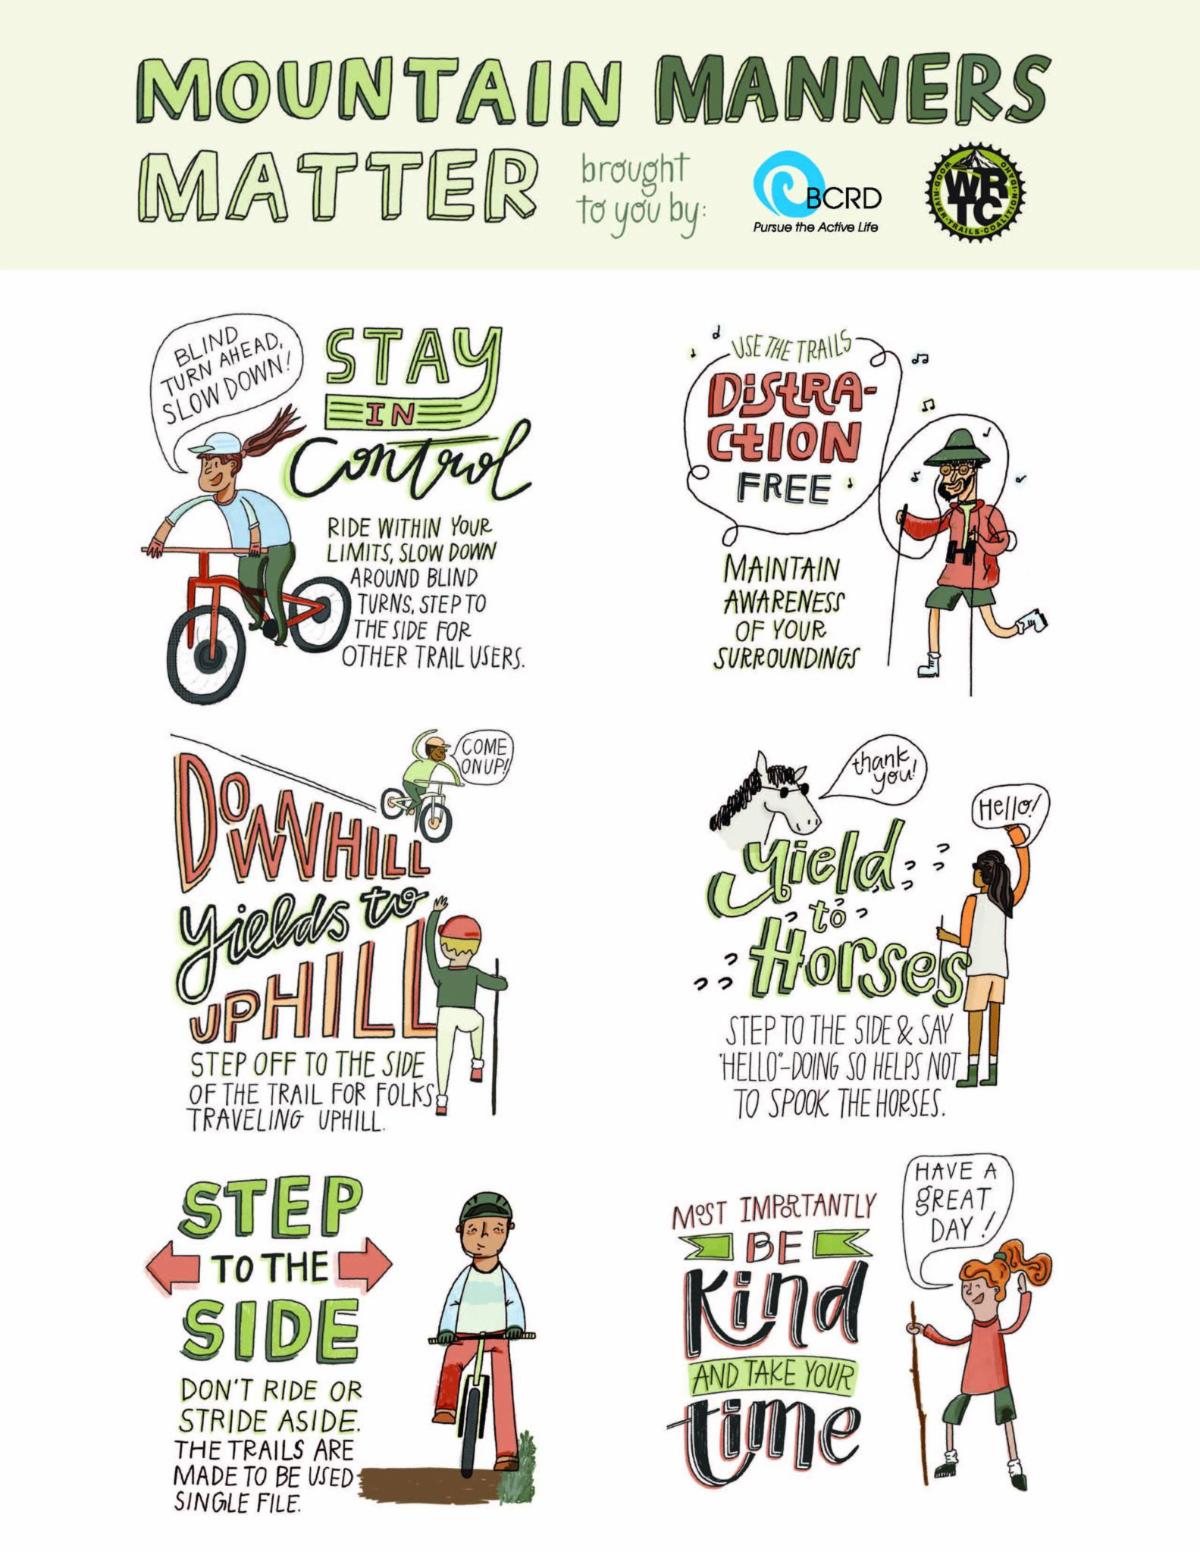 Mountan Manners | Recreate Responsibly Poster from BCRD